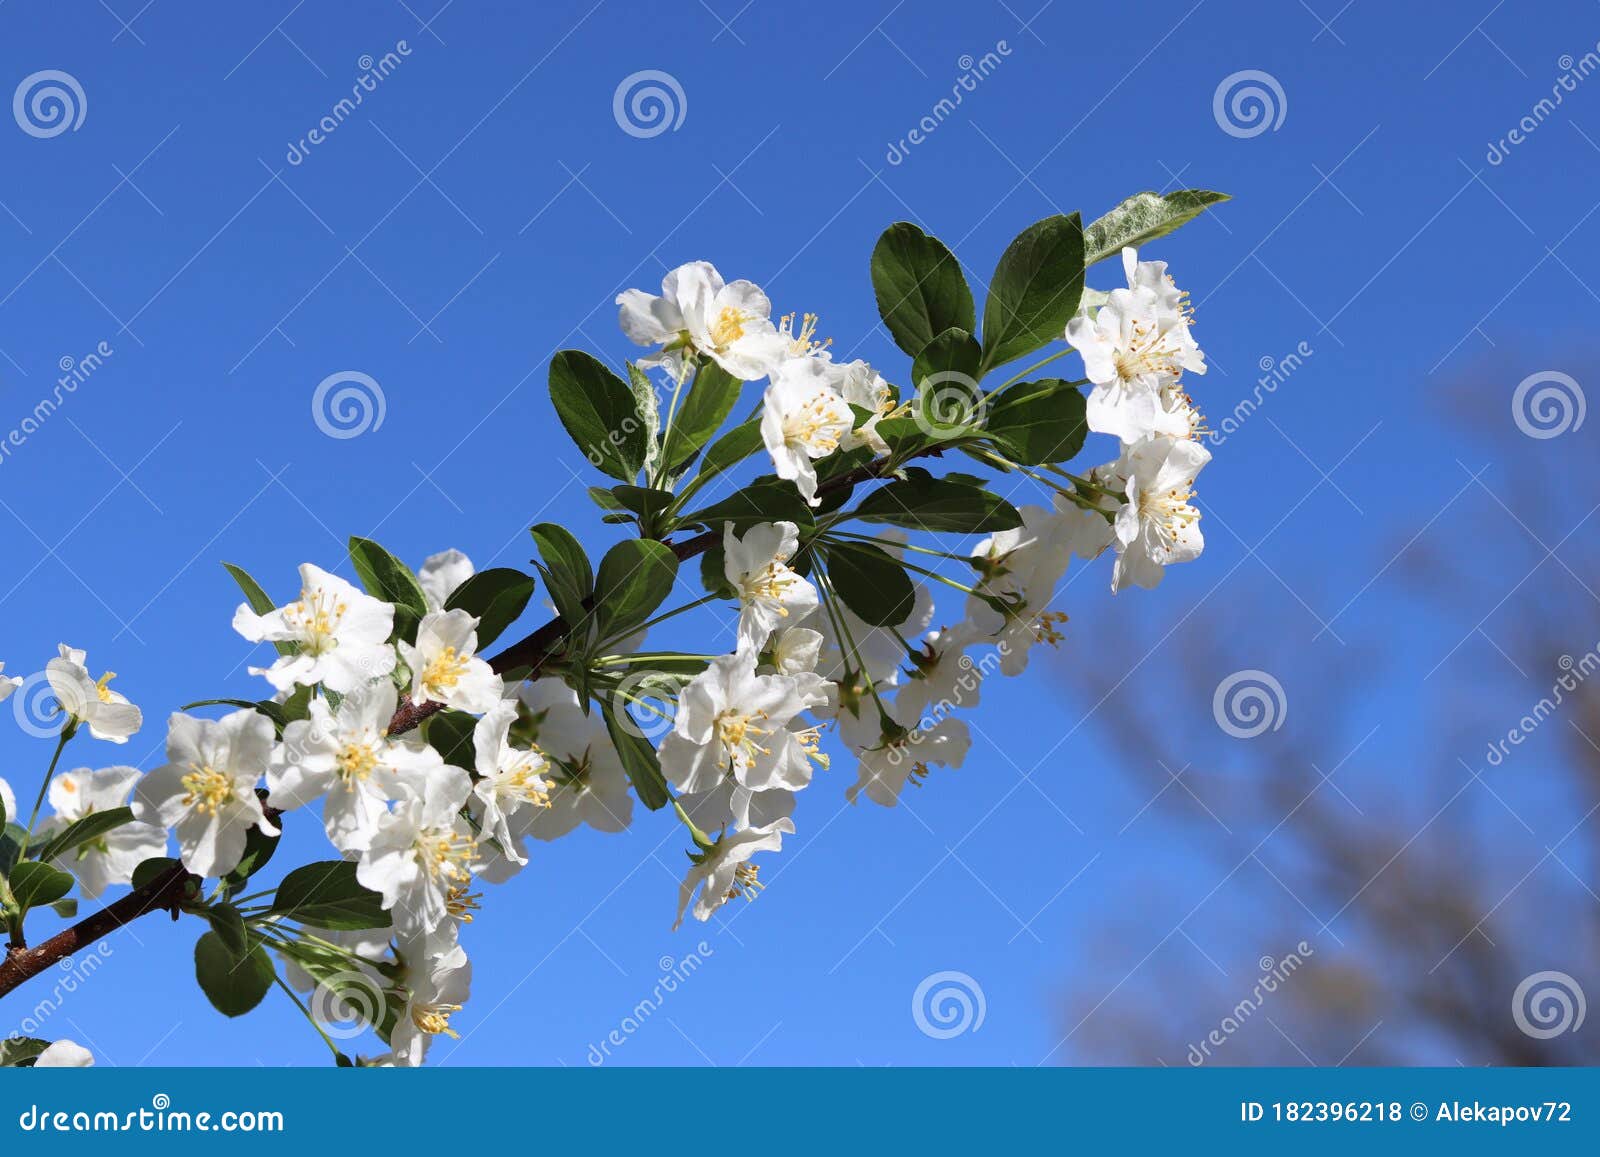 A Branch Of A Blossoming Tree On A Background Of Blue Sky And A Tree In